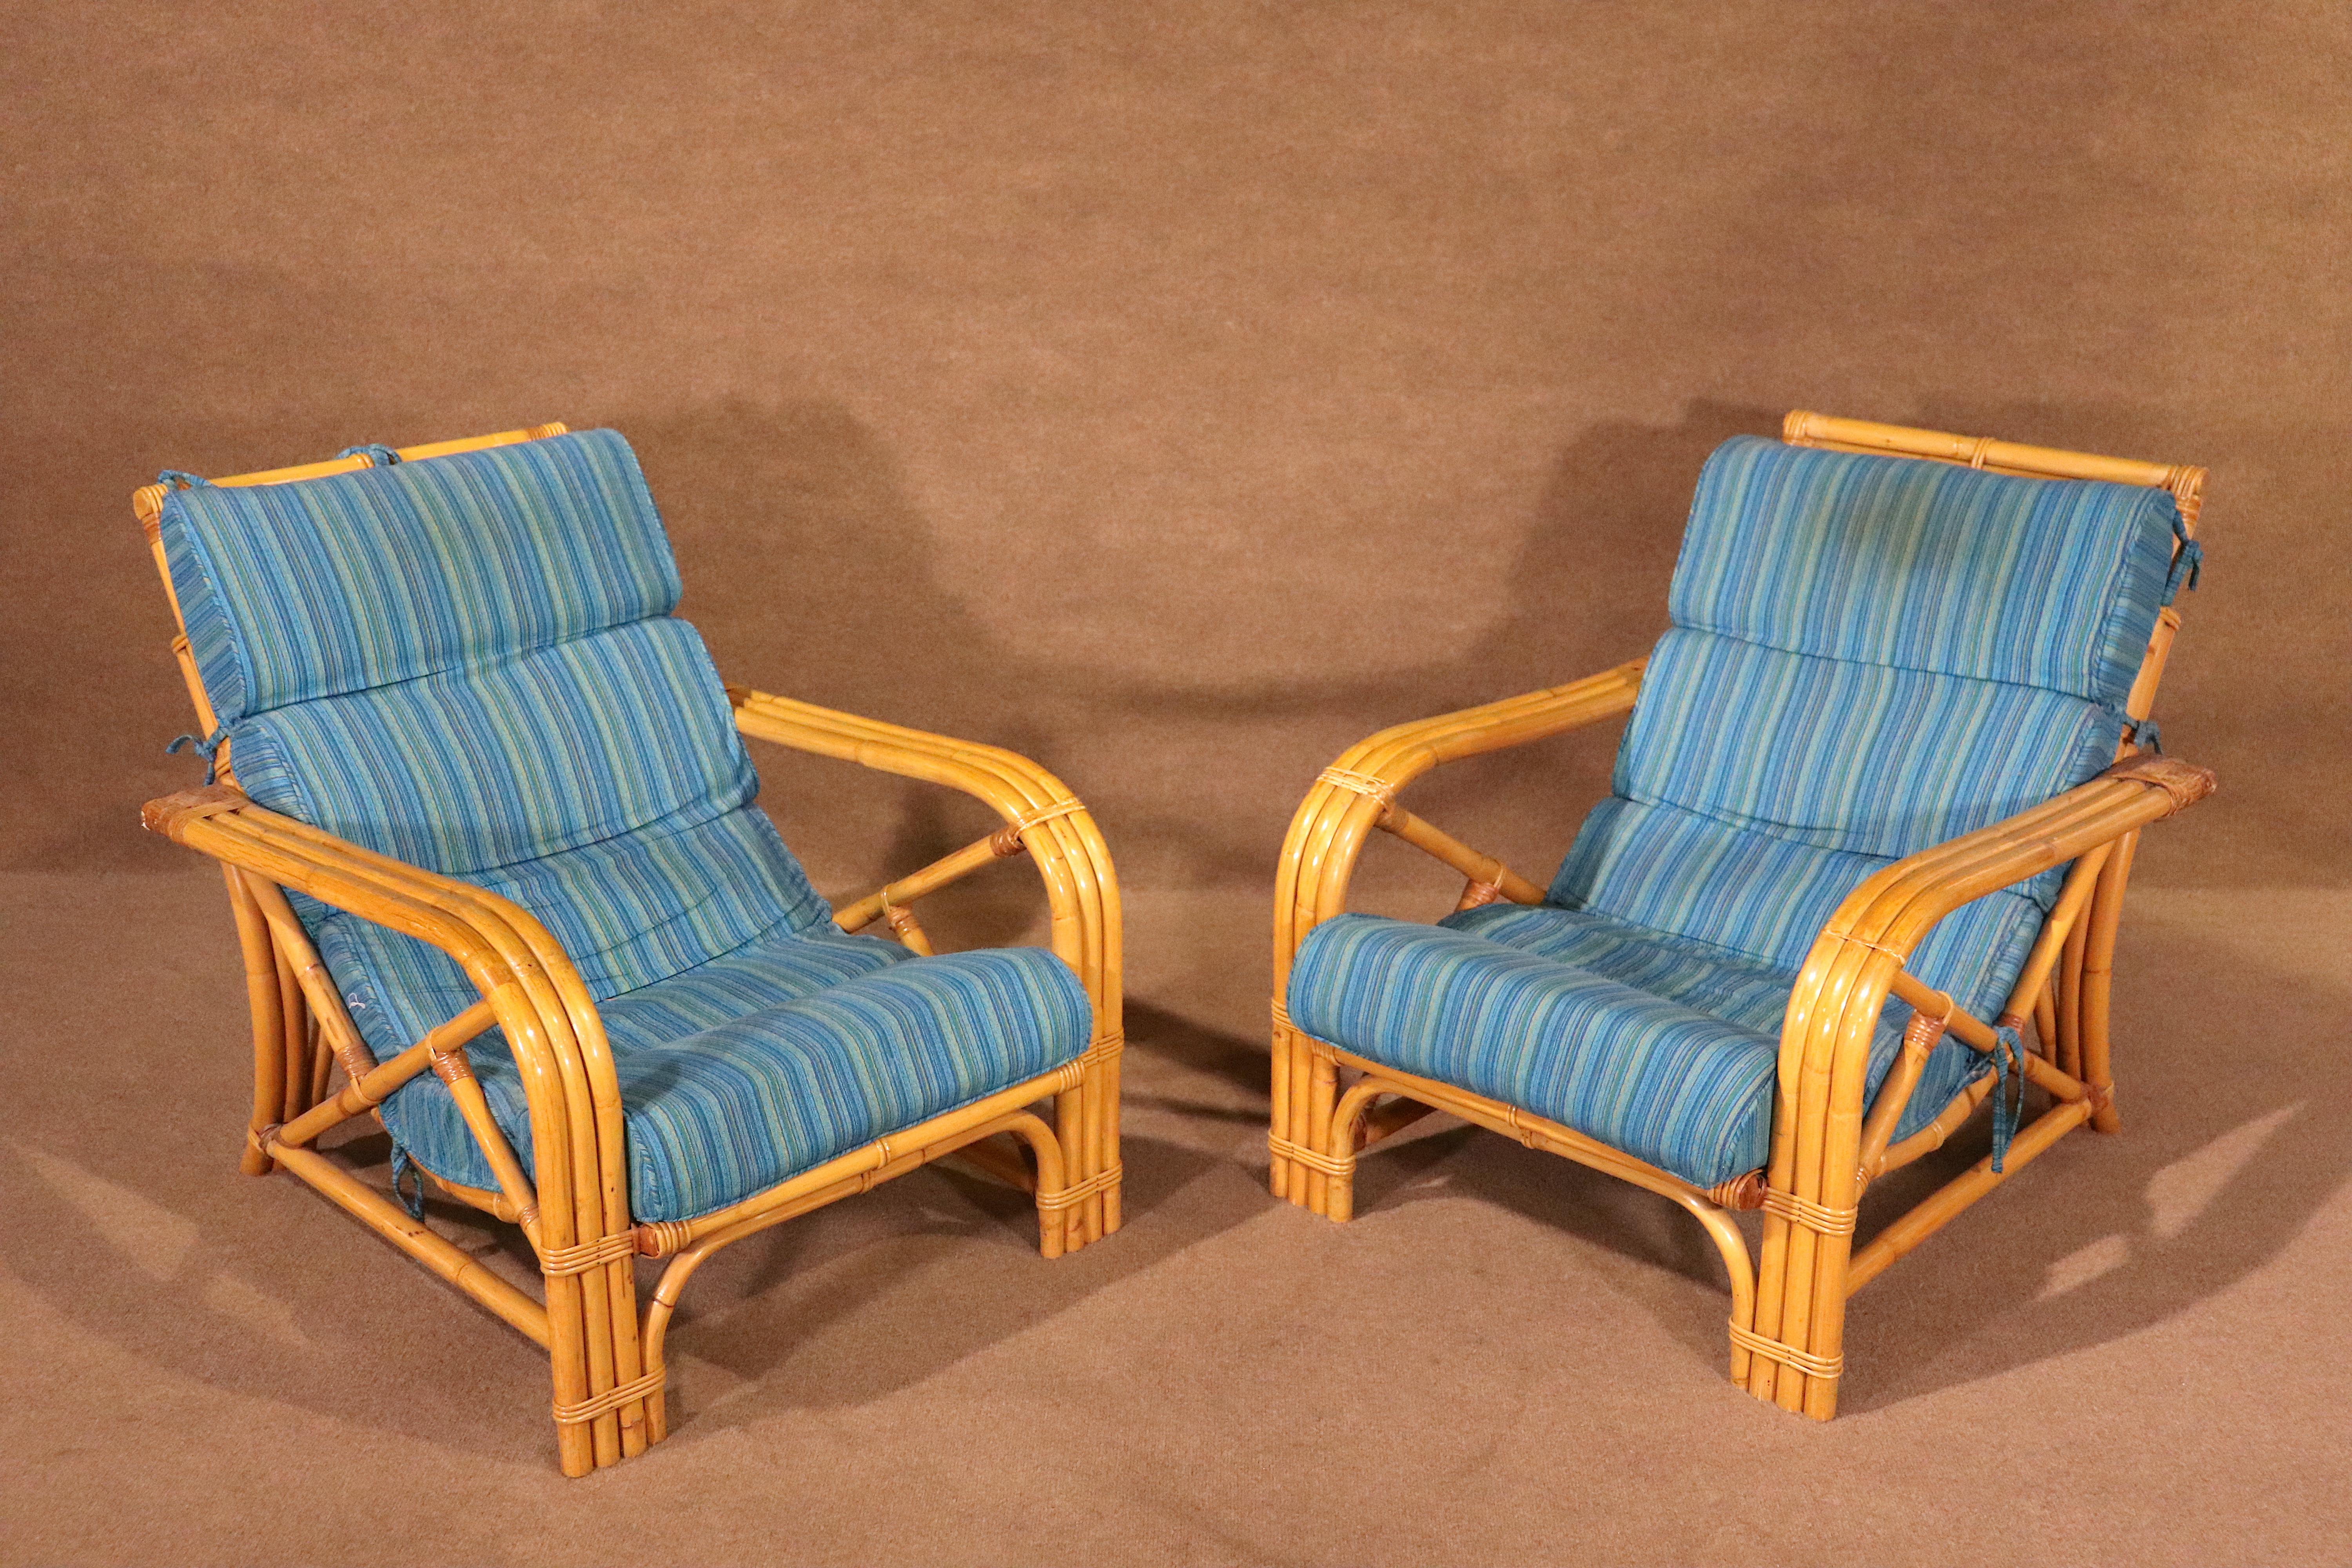 Stylish pair of Mid-Century bamboo chairs, boasting stylish and sturdy bamboo and rattan construction. Unique vintage design, padded seat, and gorgeous complementary colors.

Please confirm pickup location, NY or NJ.